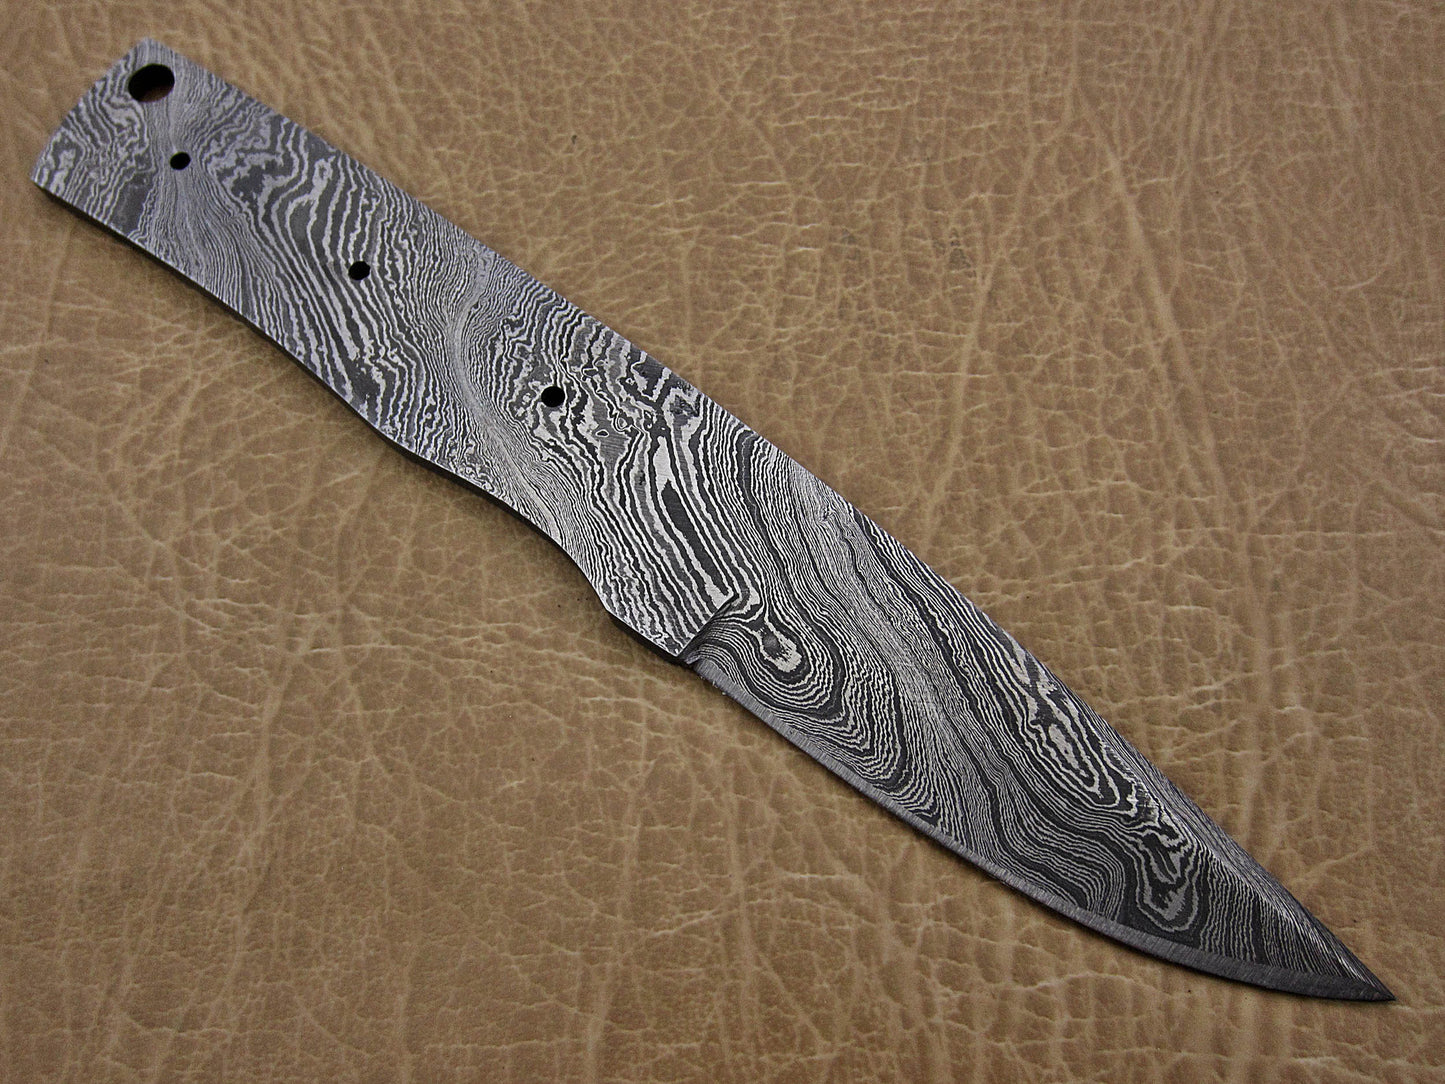 10" Long hand forged Twist pattern full tang Damascus steel hunting Knife blank blade with 4.5" cutting edge, Up to 4.5 Inches scale insert (Copy)